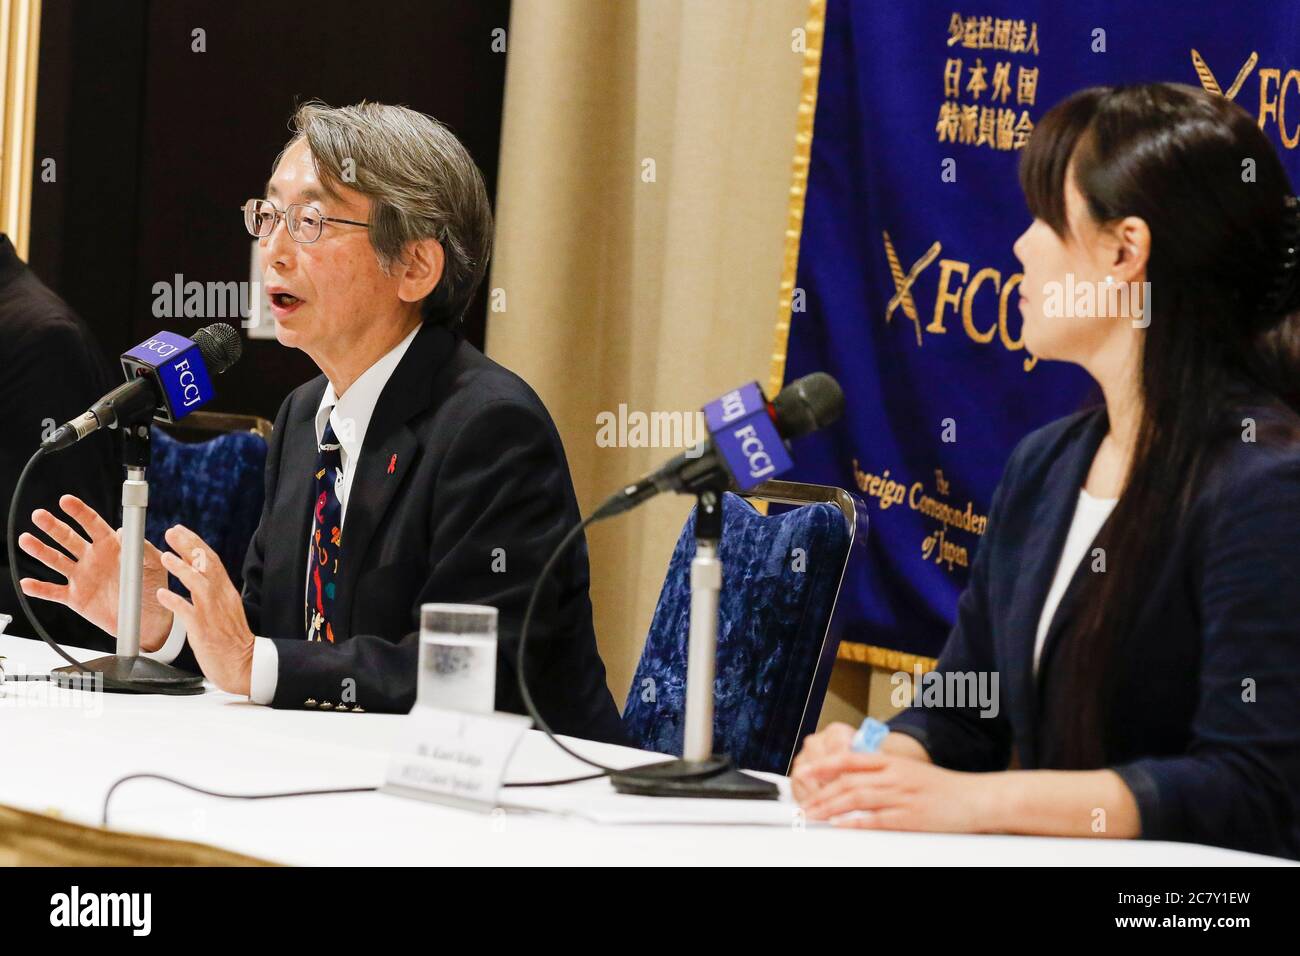 (L to R) Dr. Shinya Iwamuro urologist and public health advocate and Kaori Kohga head of the Nightlife Business Association, speak during a news conference at The Foreign Correspondents' Club of Japan (FCCJ) on July 20, 2020, Tokyo, Japan. Kohga, who is representing hostess workers and clubs across Japan, came to the Club alongside Dr. Iwamuro to talk about the challenges of nightlife workers amid coronavirus pandemic, in which recent infection cases have been rises among people in their 20s and 30s. Credit: Rodrigo Reyes Marin/AFLO/Alamy Live News Stock Photo